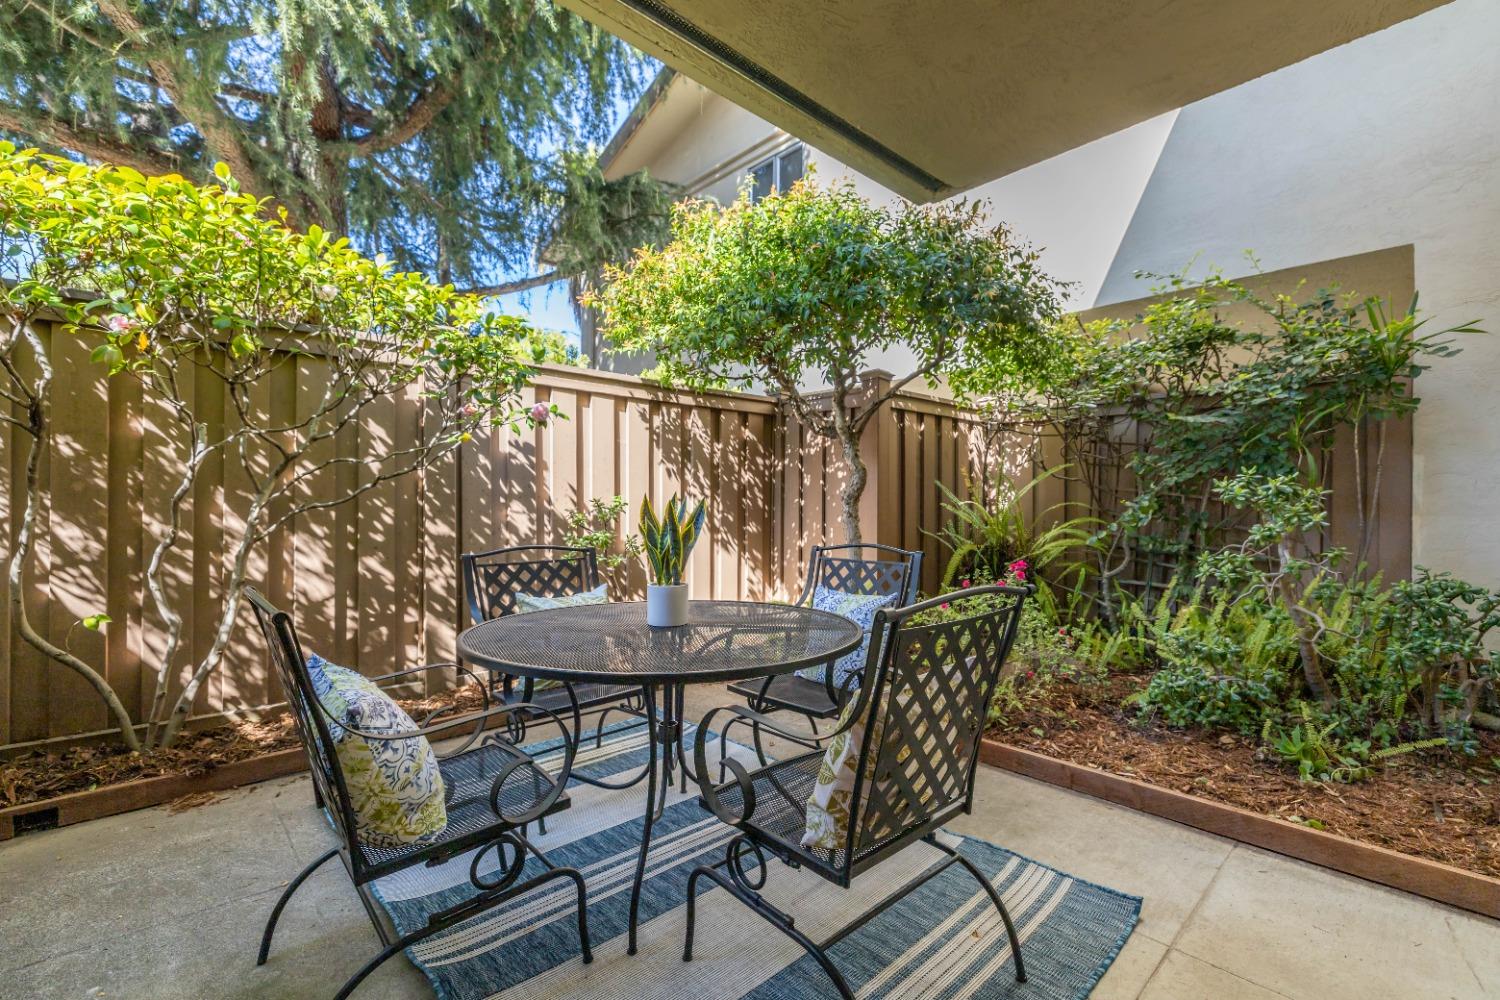 a view of a backyard with table and chairs and potted plants